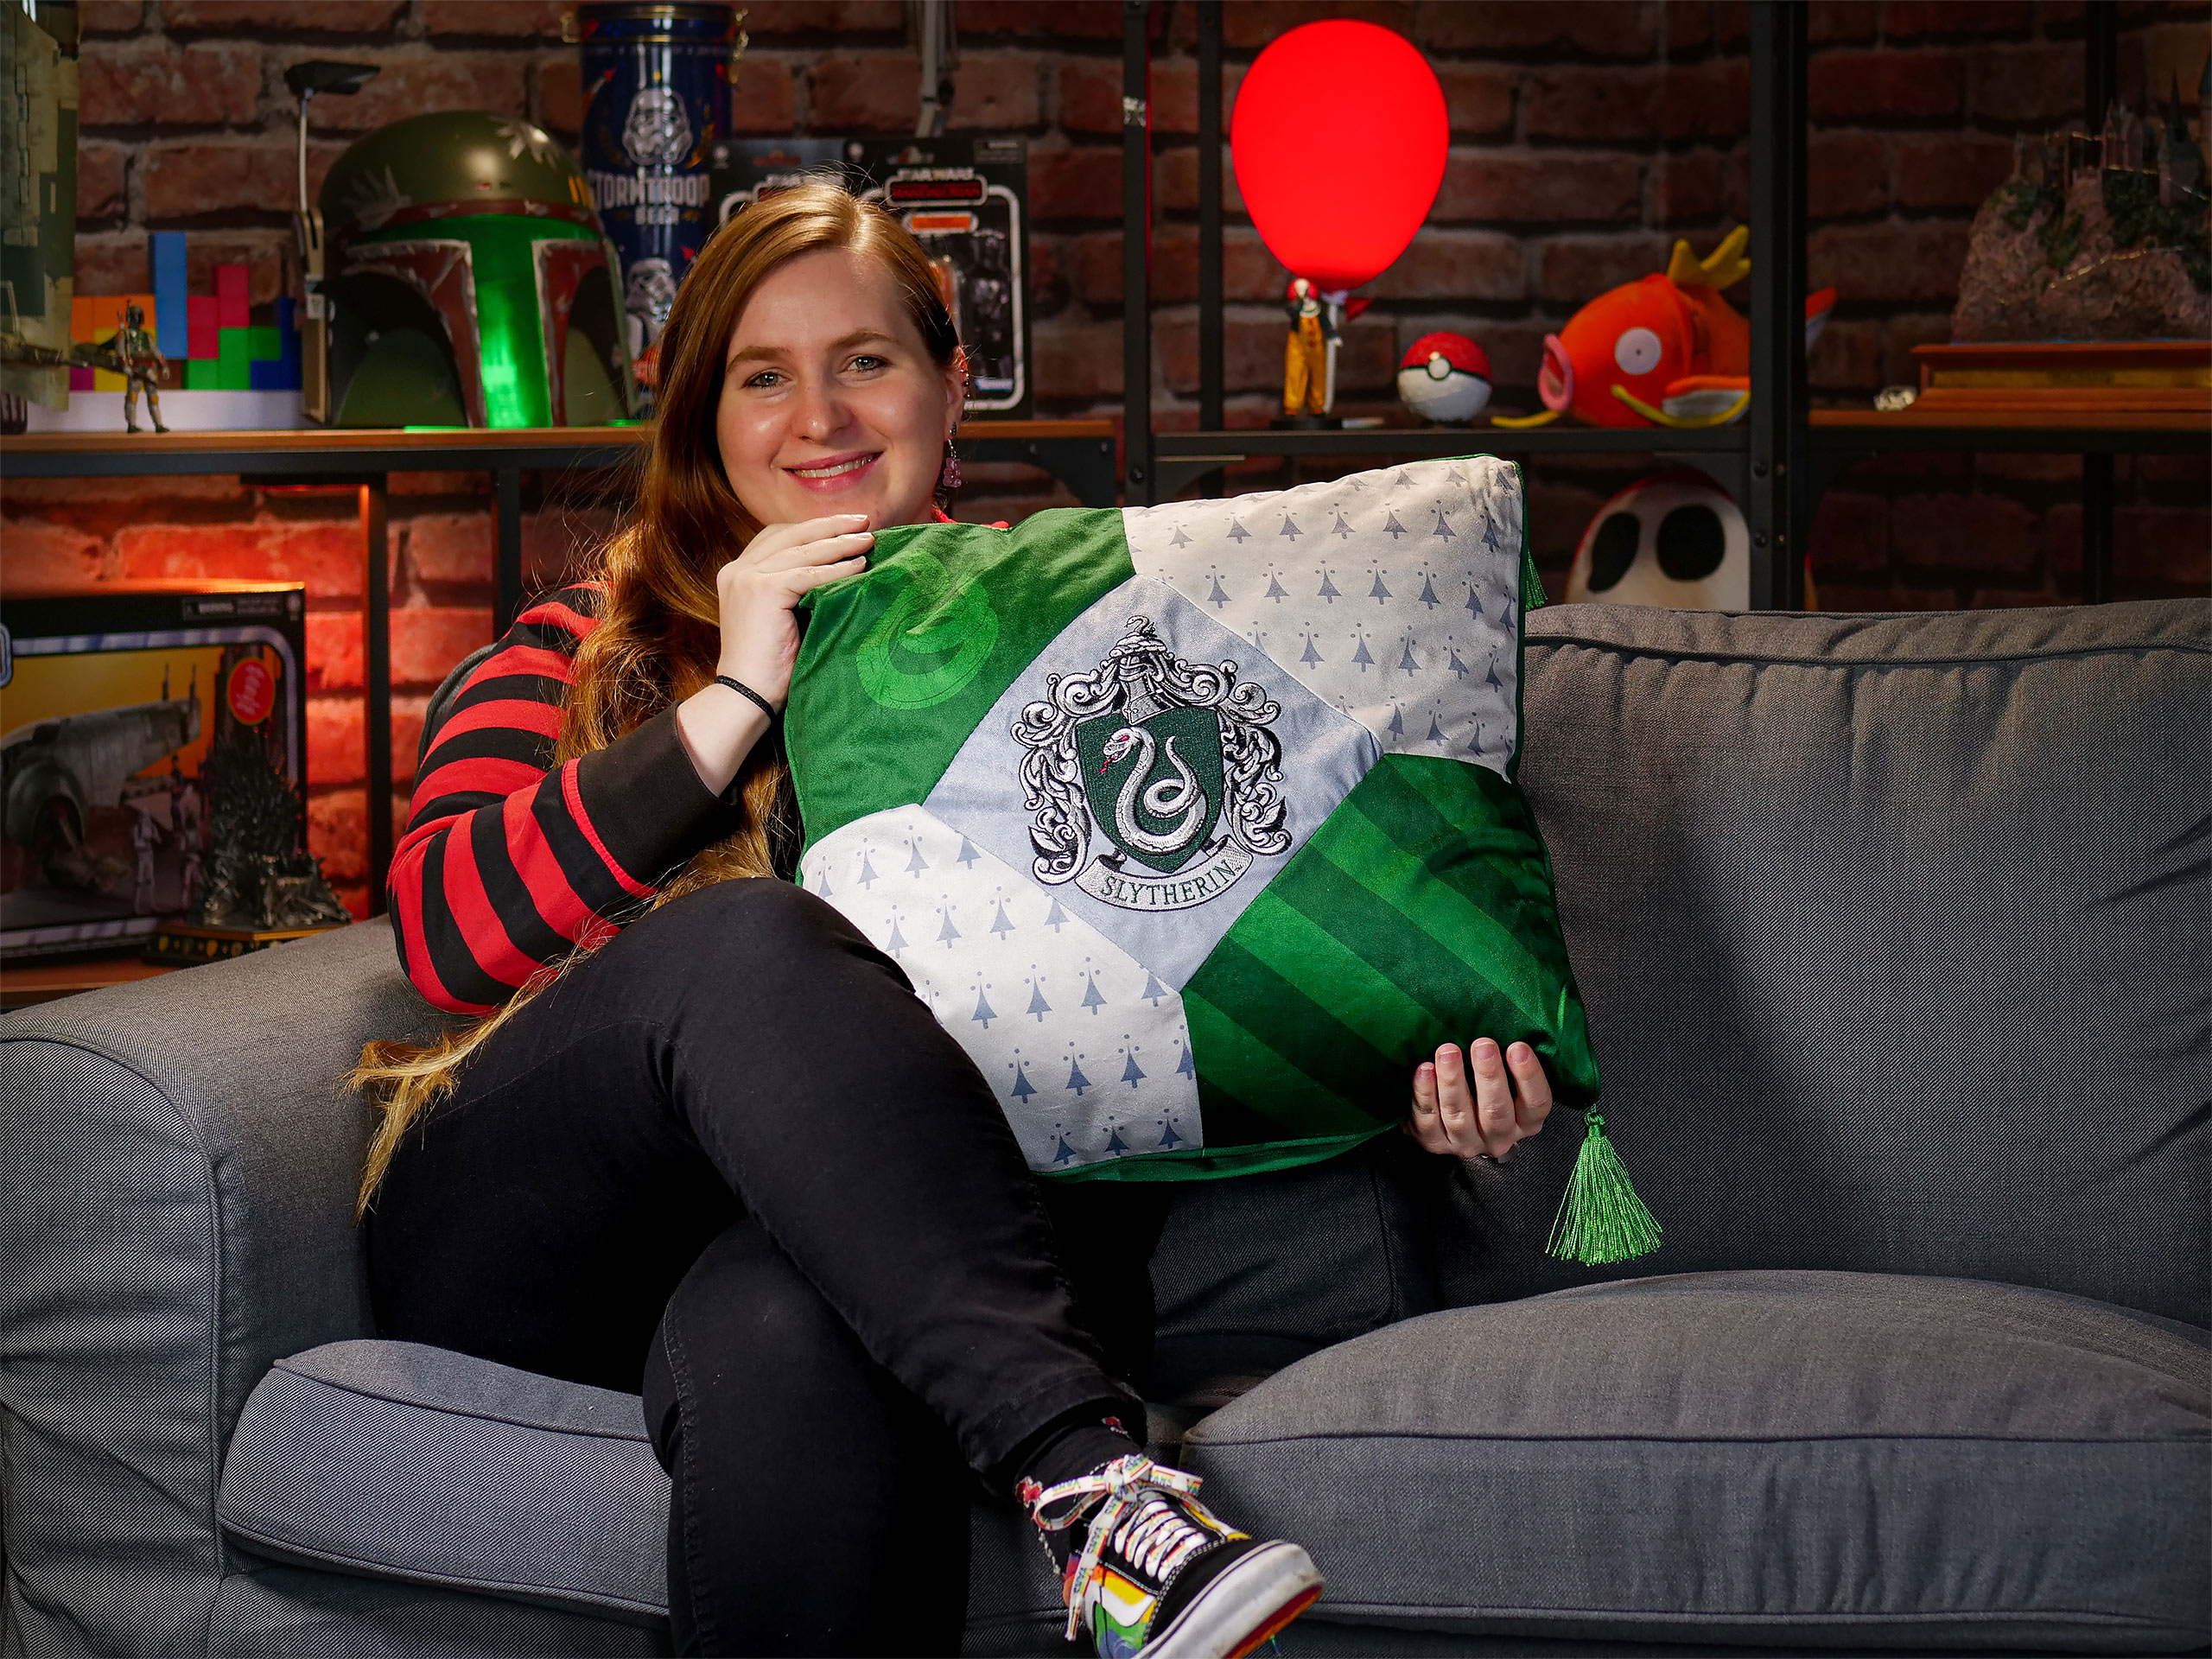 Harry Potter - Slytherin Deluxe Cushion with Tassels